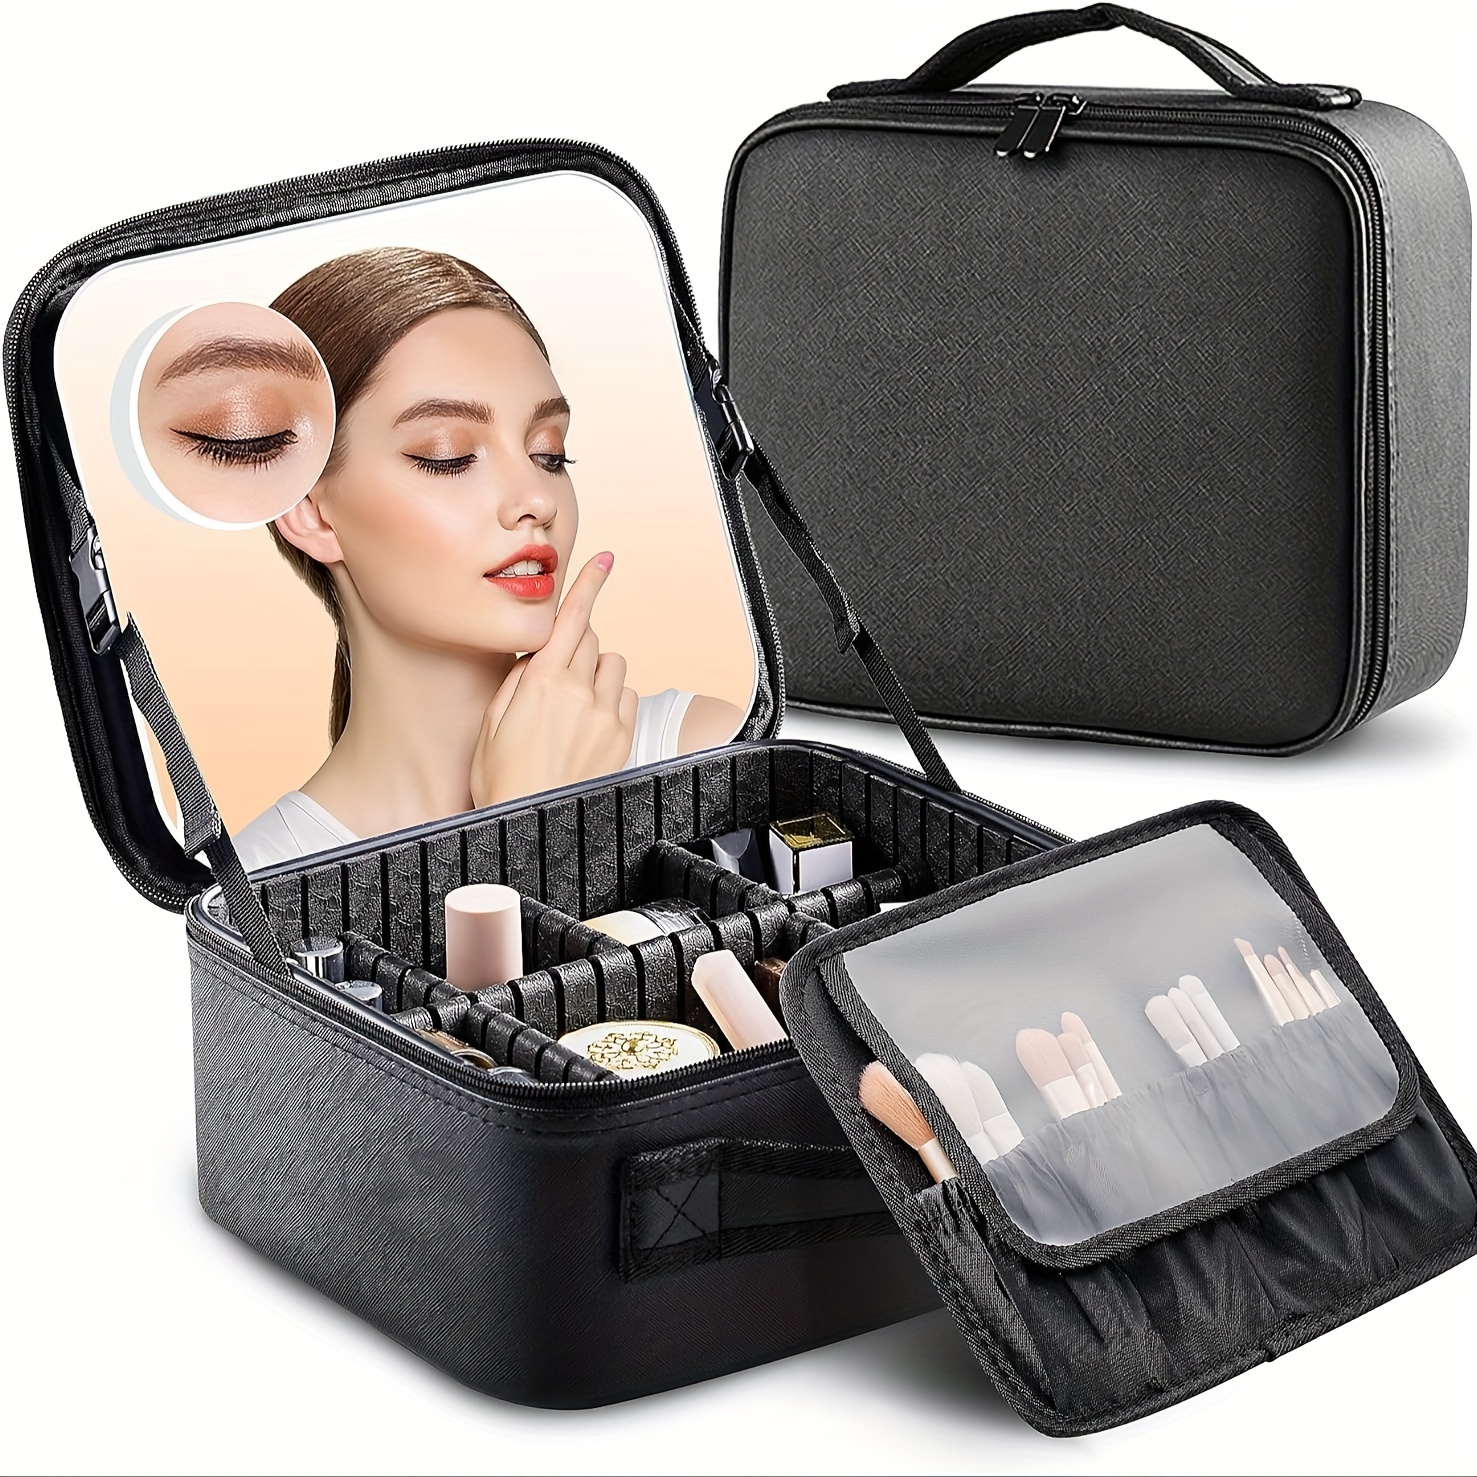 

Travel Makeup Bag Make Up Case With Mirror Cosmetic Makeup Box Organizer Vanity Case For Women Beauty Tools Accessories Case